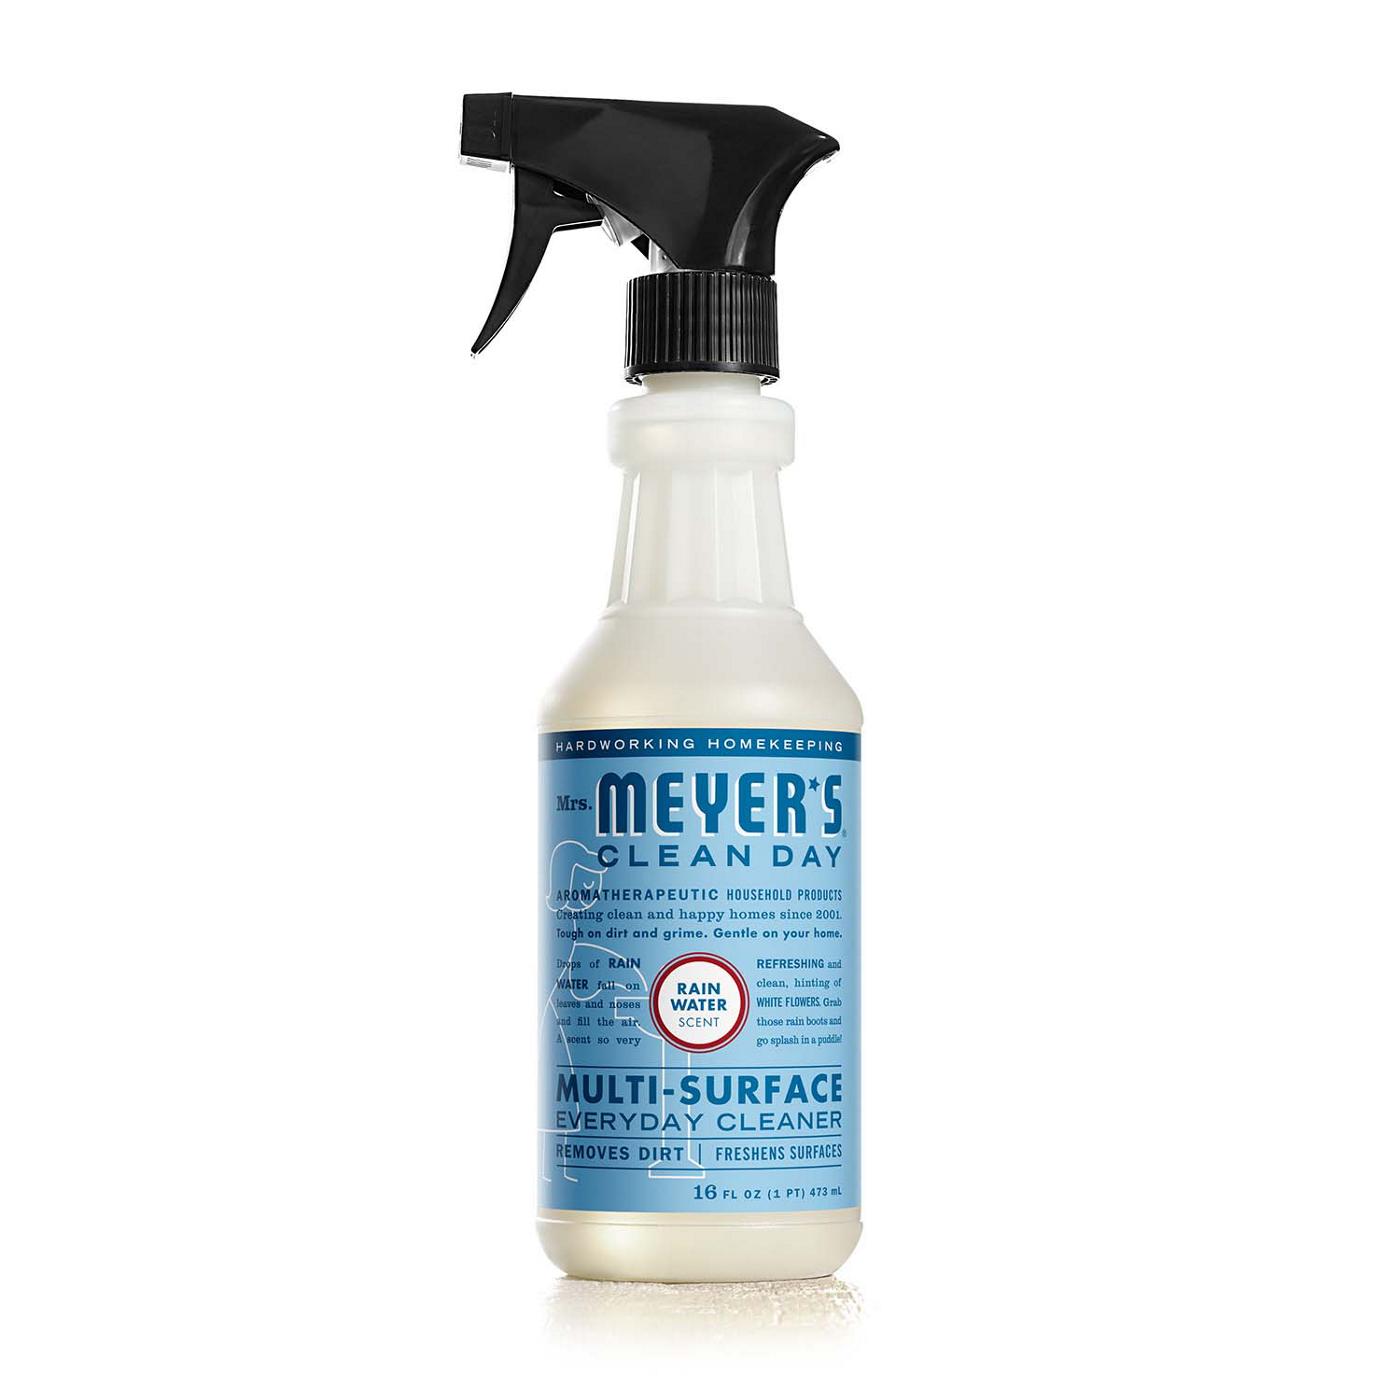 Mrs. Meyer's Clean Day Rainwater Scent Multi-Surface Everyday Cleaner Spray; image 1 of 6